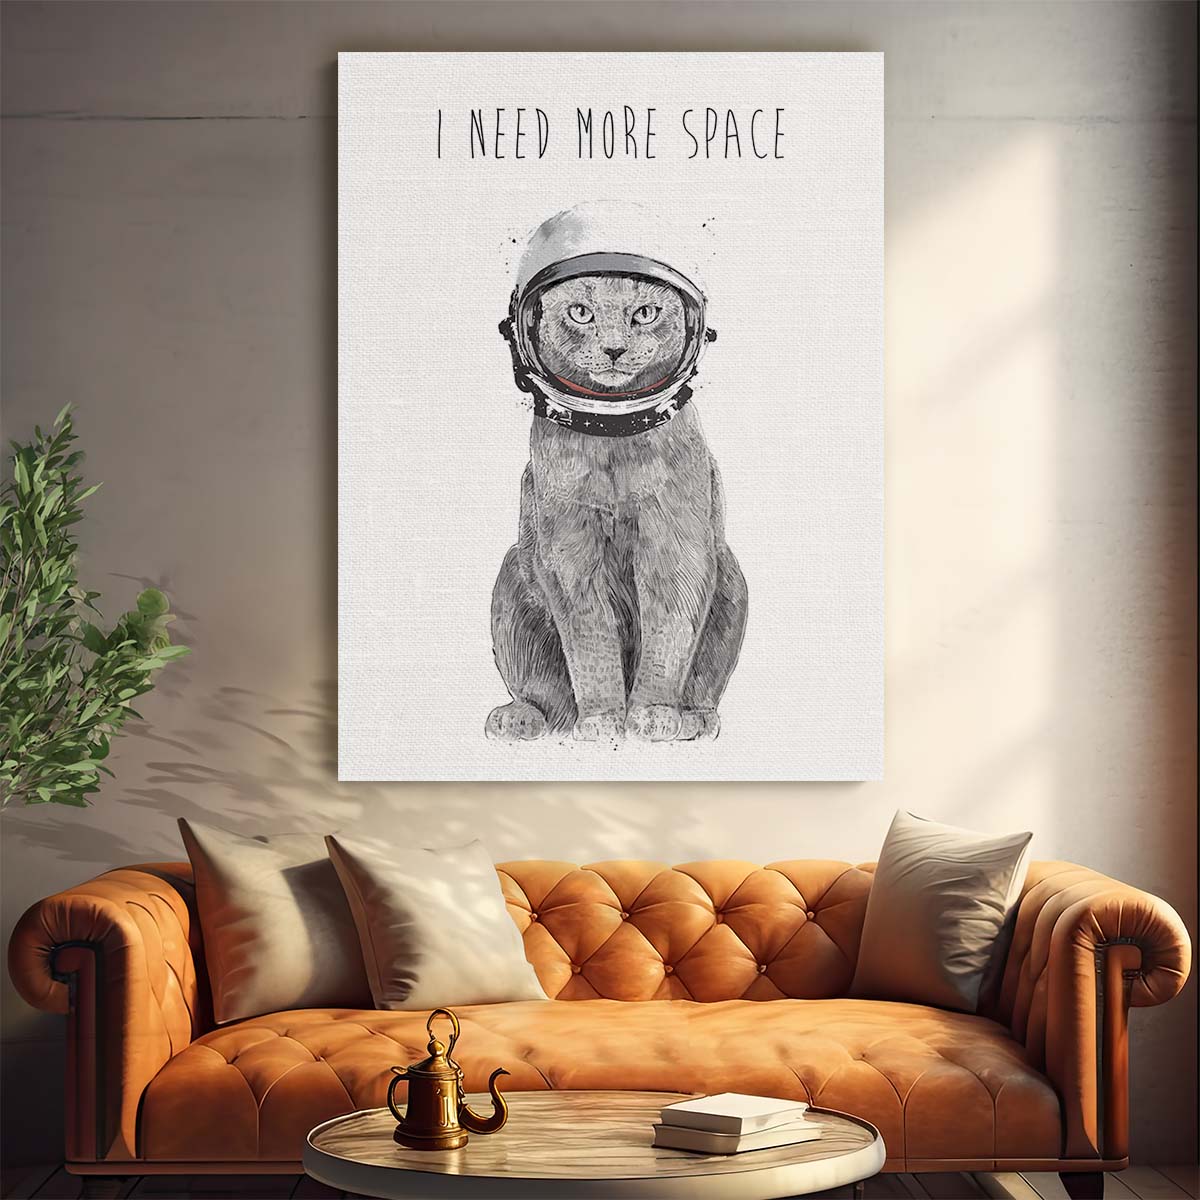 Funny Astronaut Cat Illustration, Motivational Quote Wall Art by Luxuriance Designs, made in USA